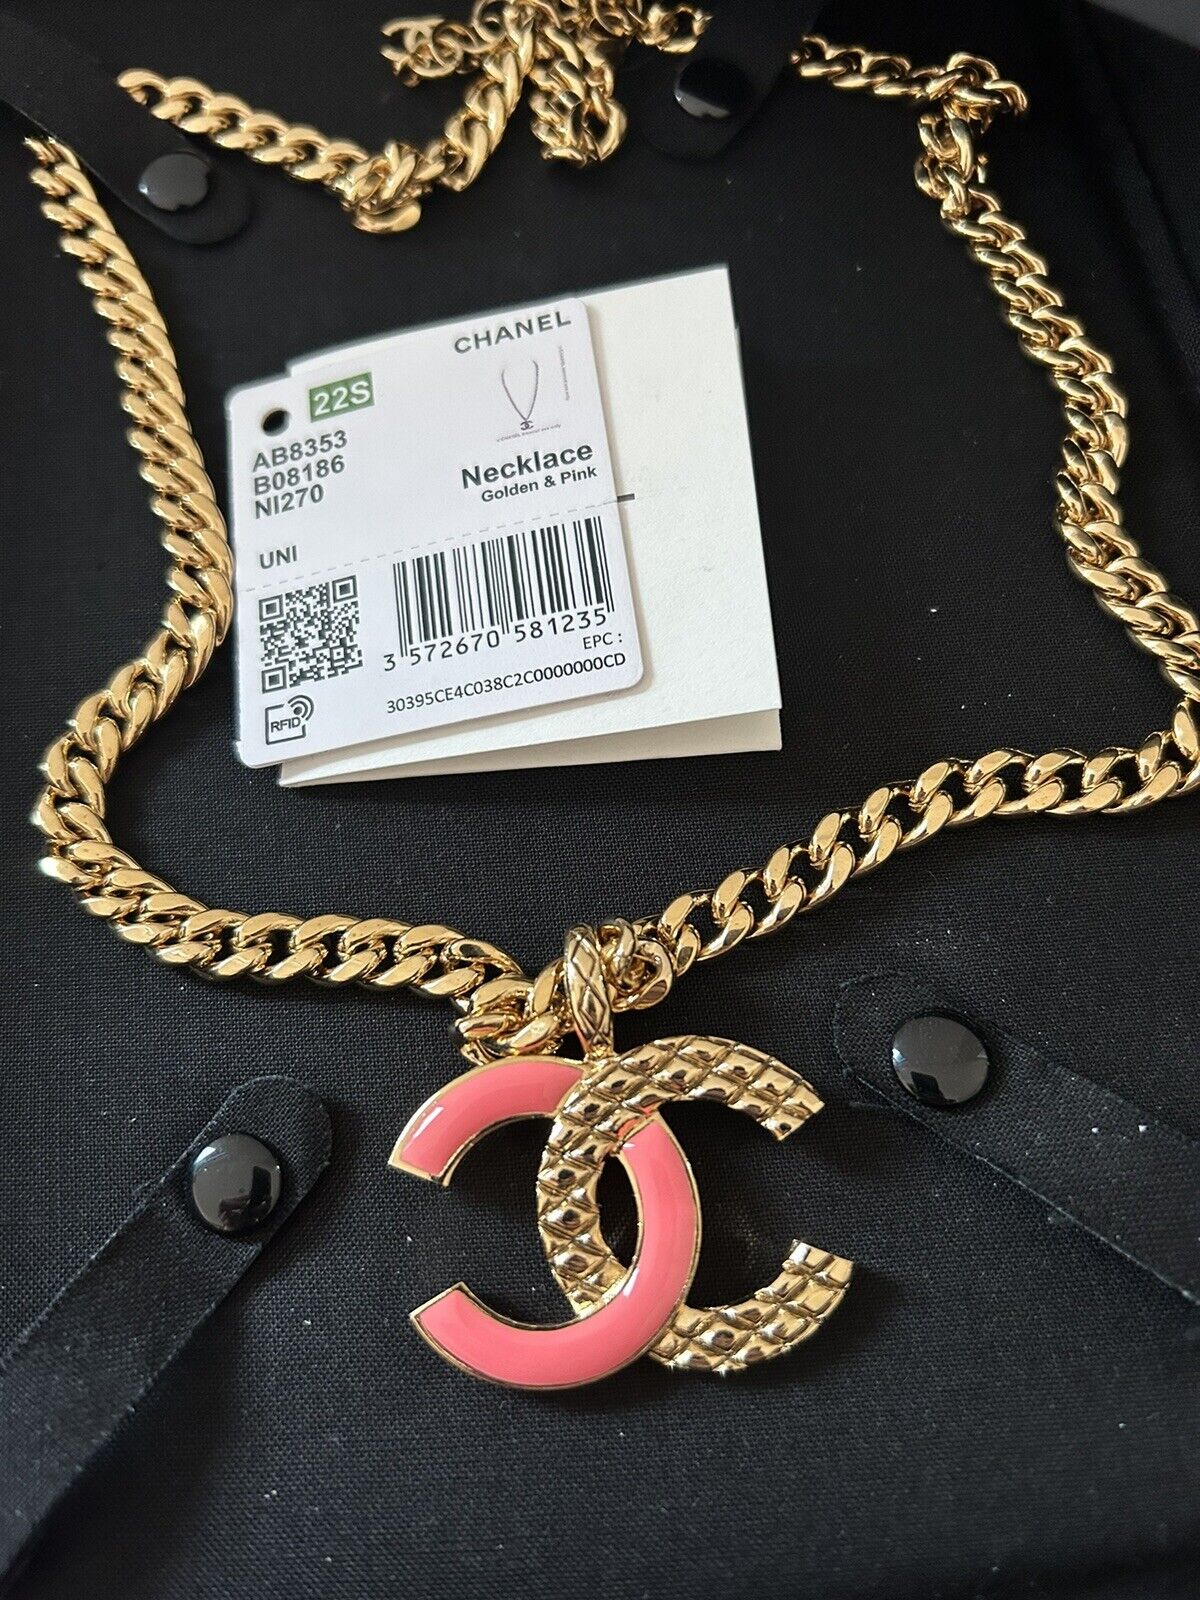 Shop chanel necklace for Sale on Shopee Philippines